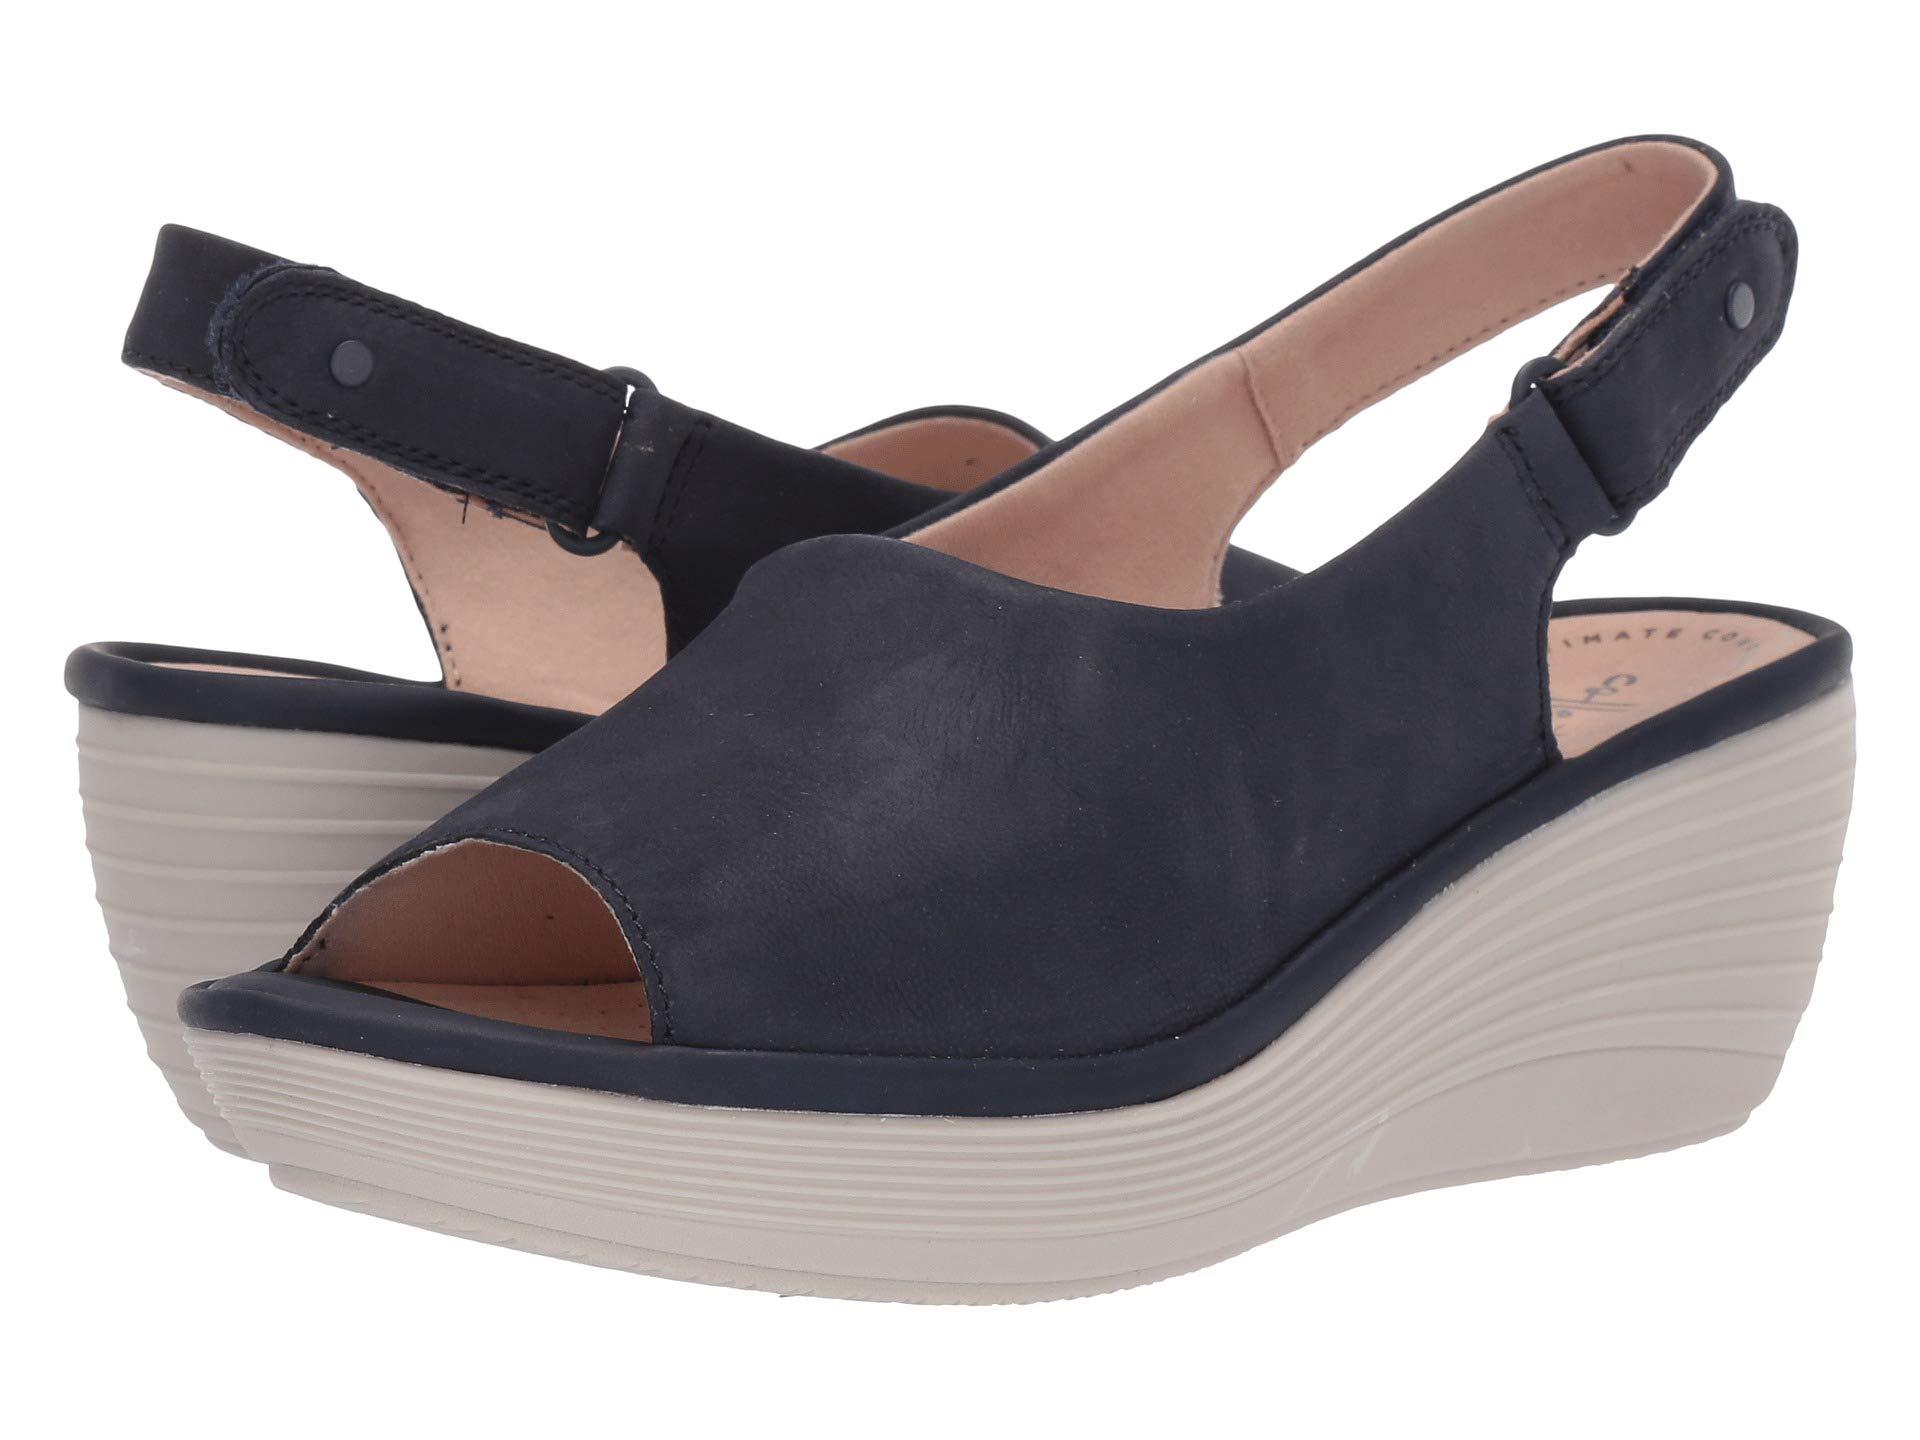 Clarks Rubber Reedly Shaina Wedge Sandal in Navy Nubuck (Blue) | Lyst